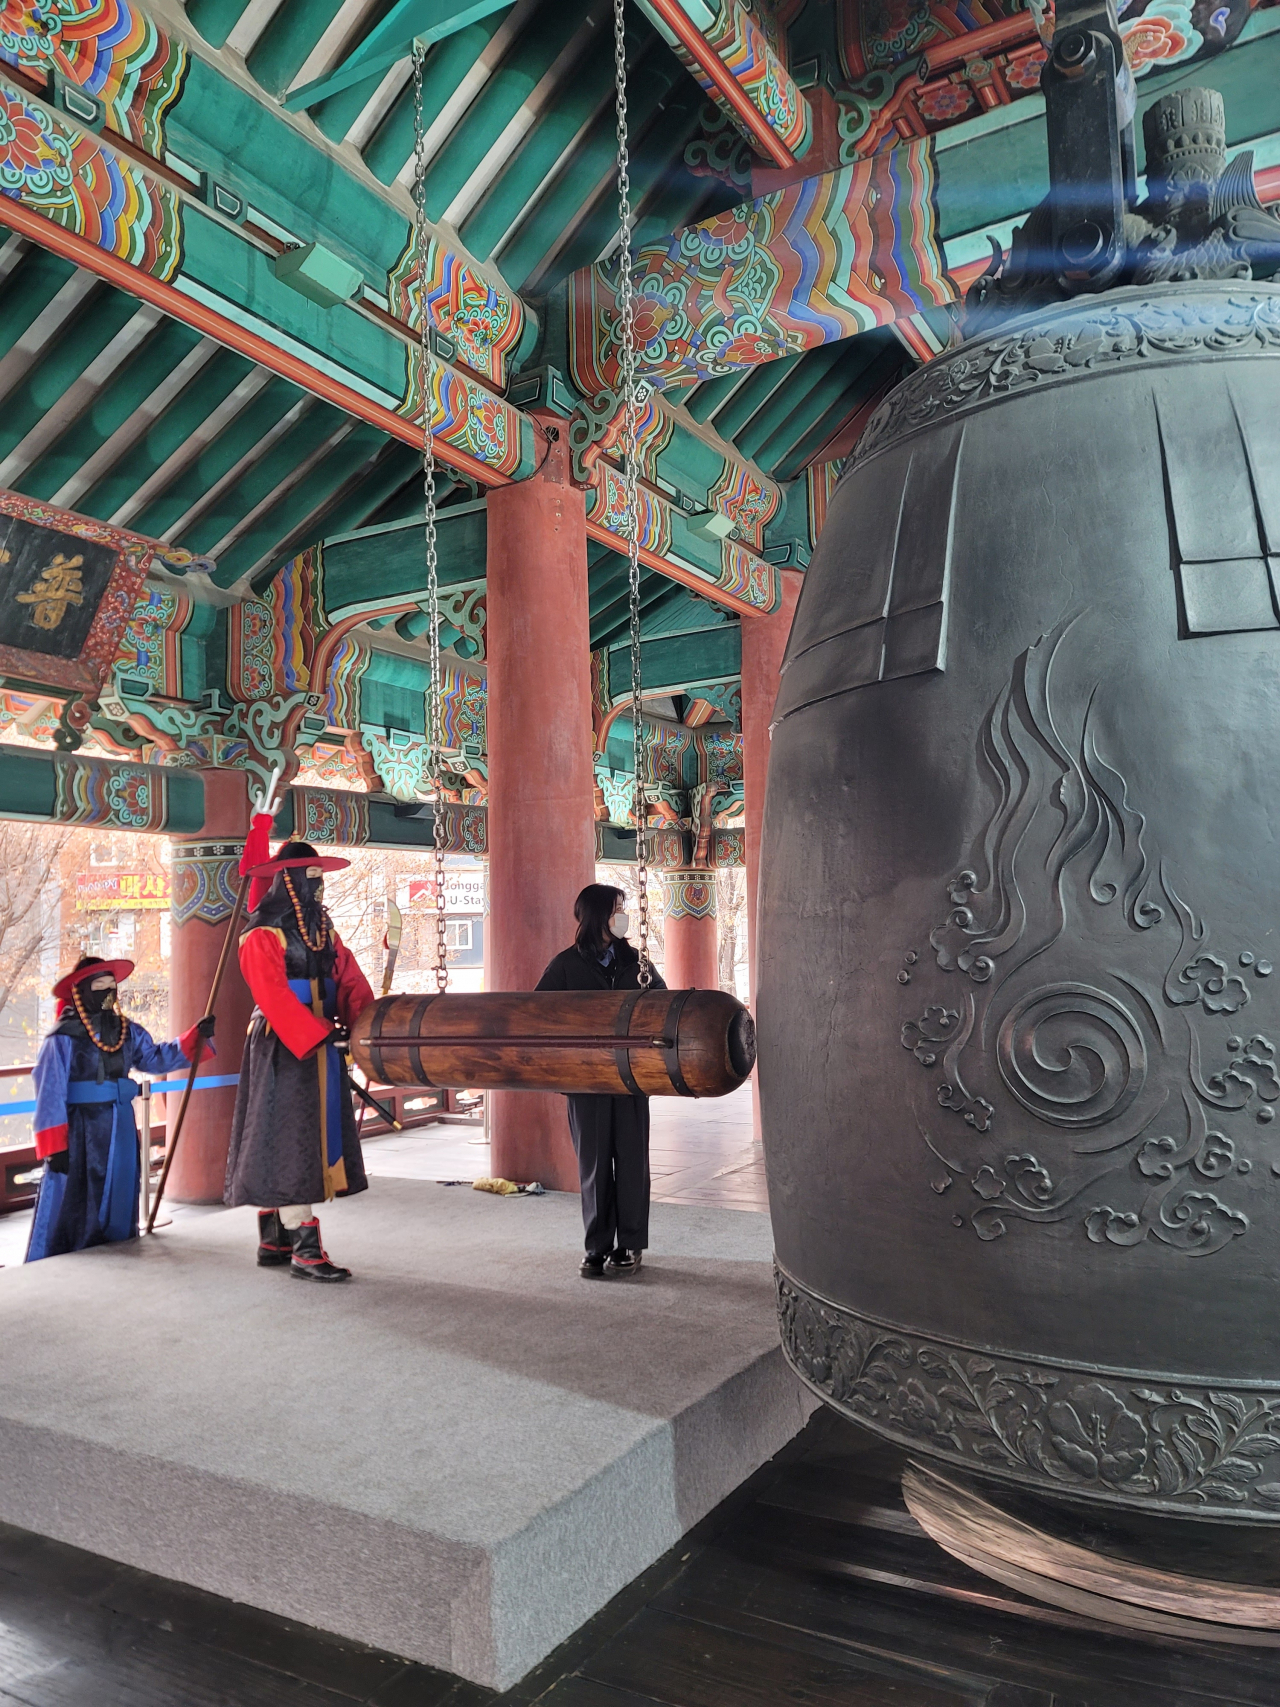 A participant prepares to ring the bell with the assistance of attendants on the second floor of Bosingak in Jongno, central Seoul. (Seoul Culture Portal)